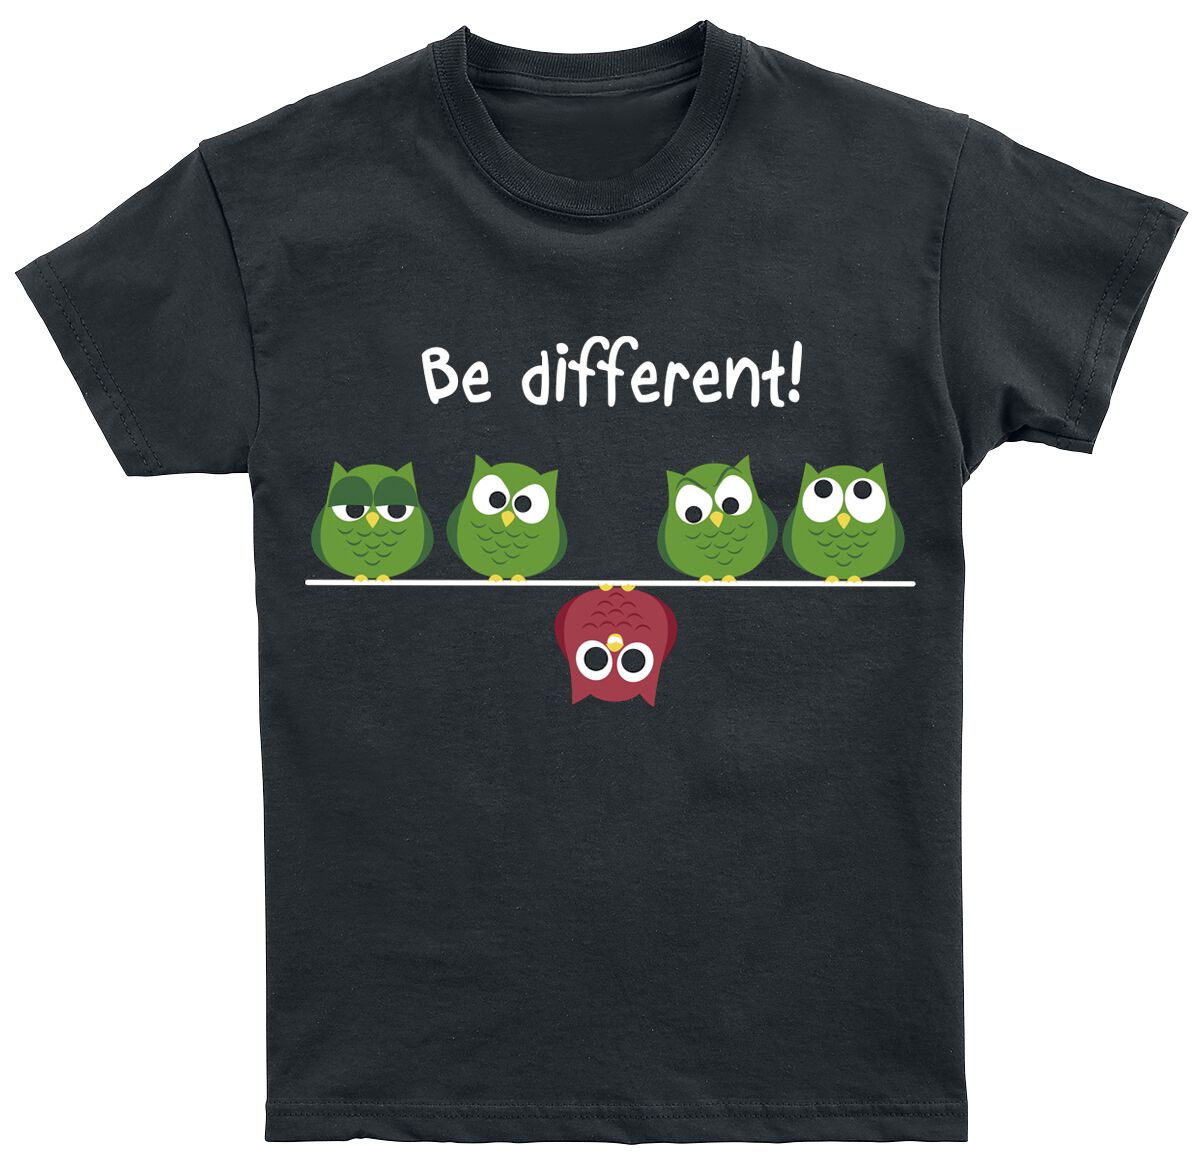 Be Different! Kids - Be Different! T-Shirt schwarz in 164